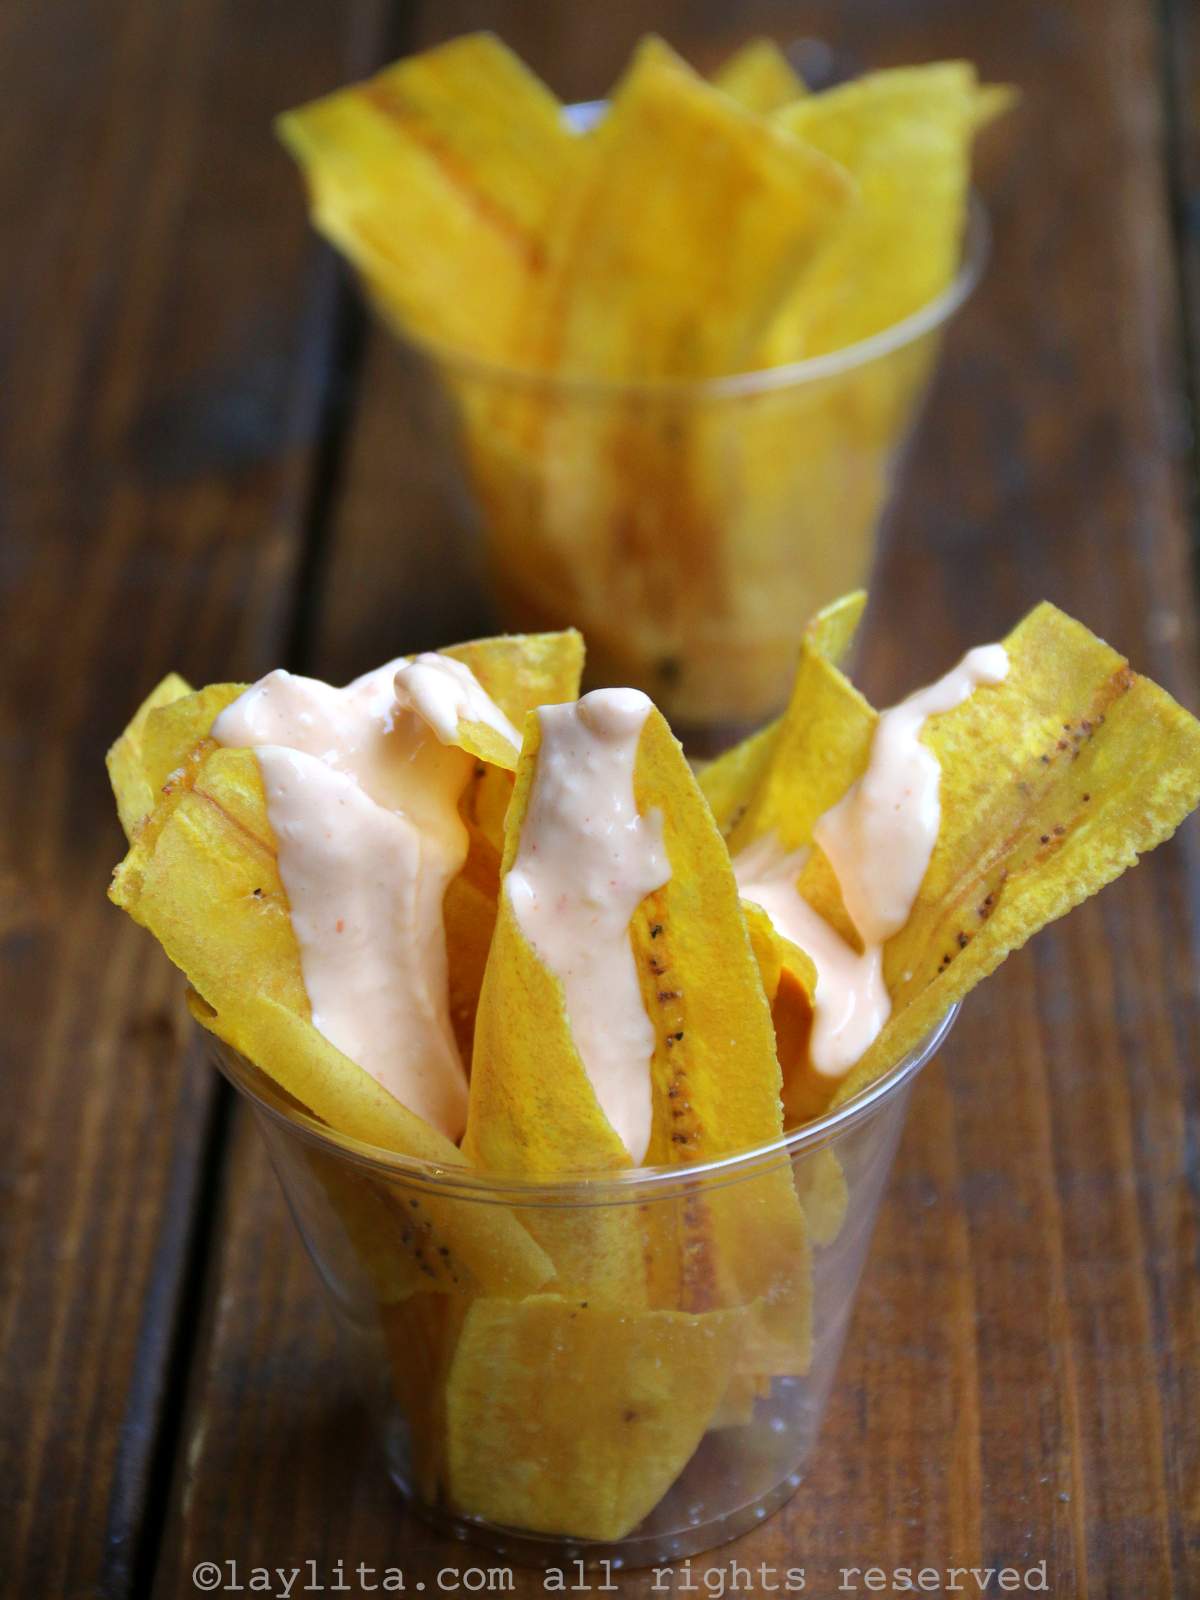 Chifles or plantain chips with homemade salsa rosada